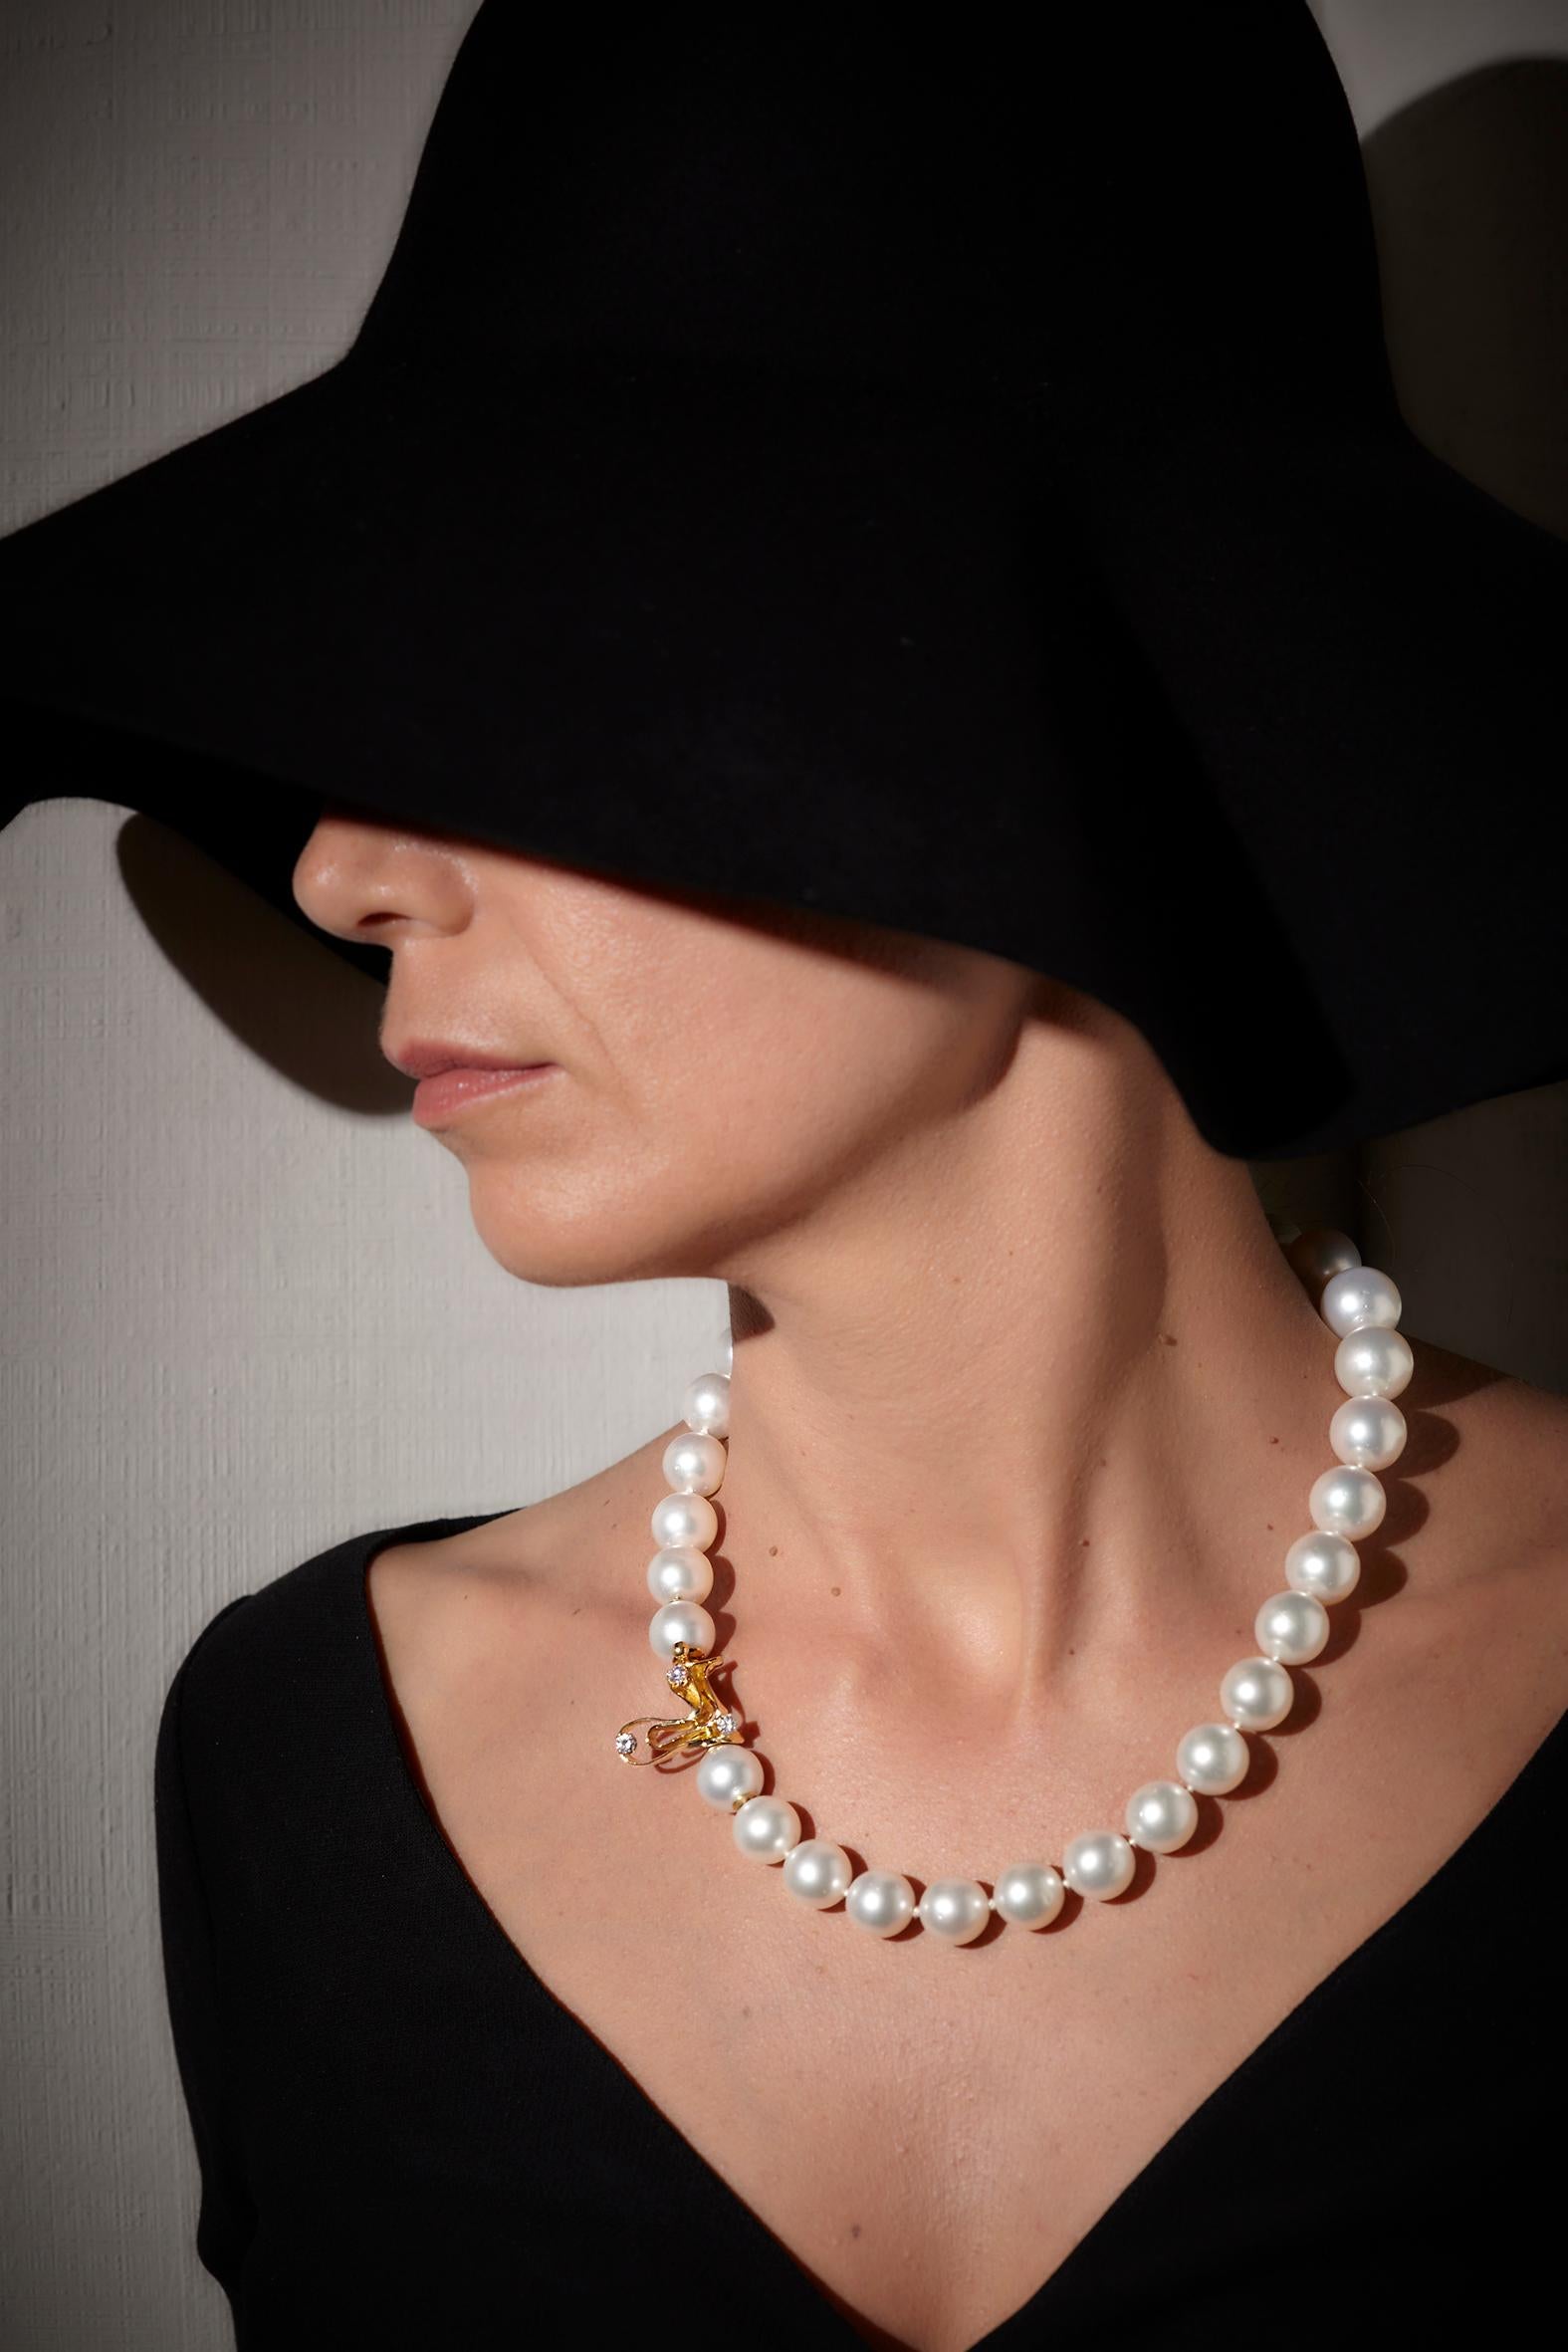 620-Carat Australian South Sea Pearls and 18K Gold Clasp with Diamonds
Unlock Your Divine Potential with the Sirio pearls necklace. 
Gems and metal are energetically cleansed to emit their best vibrations. The Sirio Necklace is 50 centimeters long